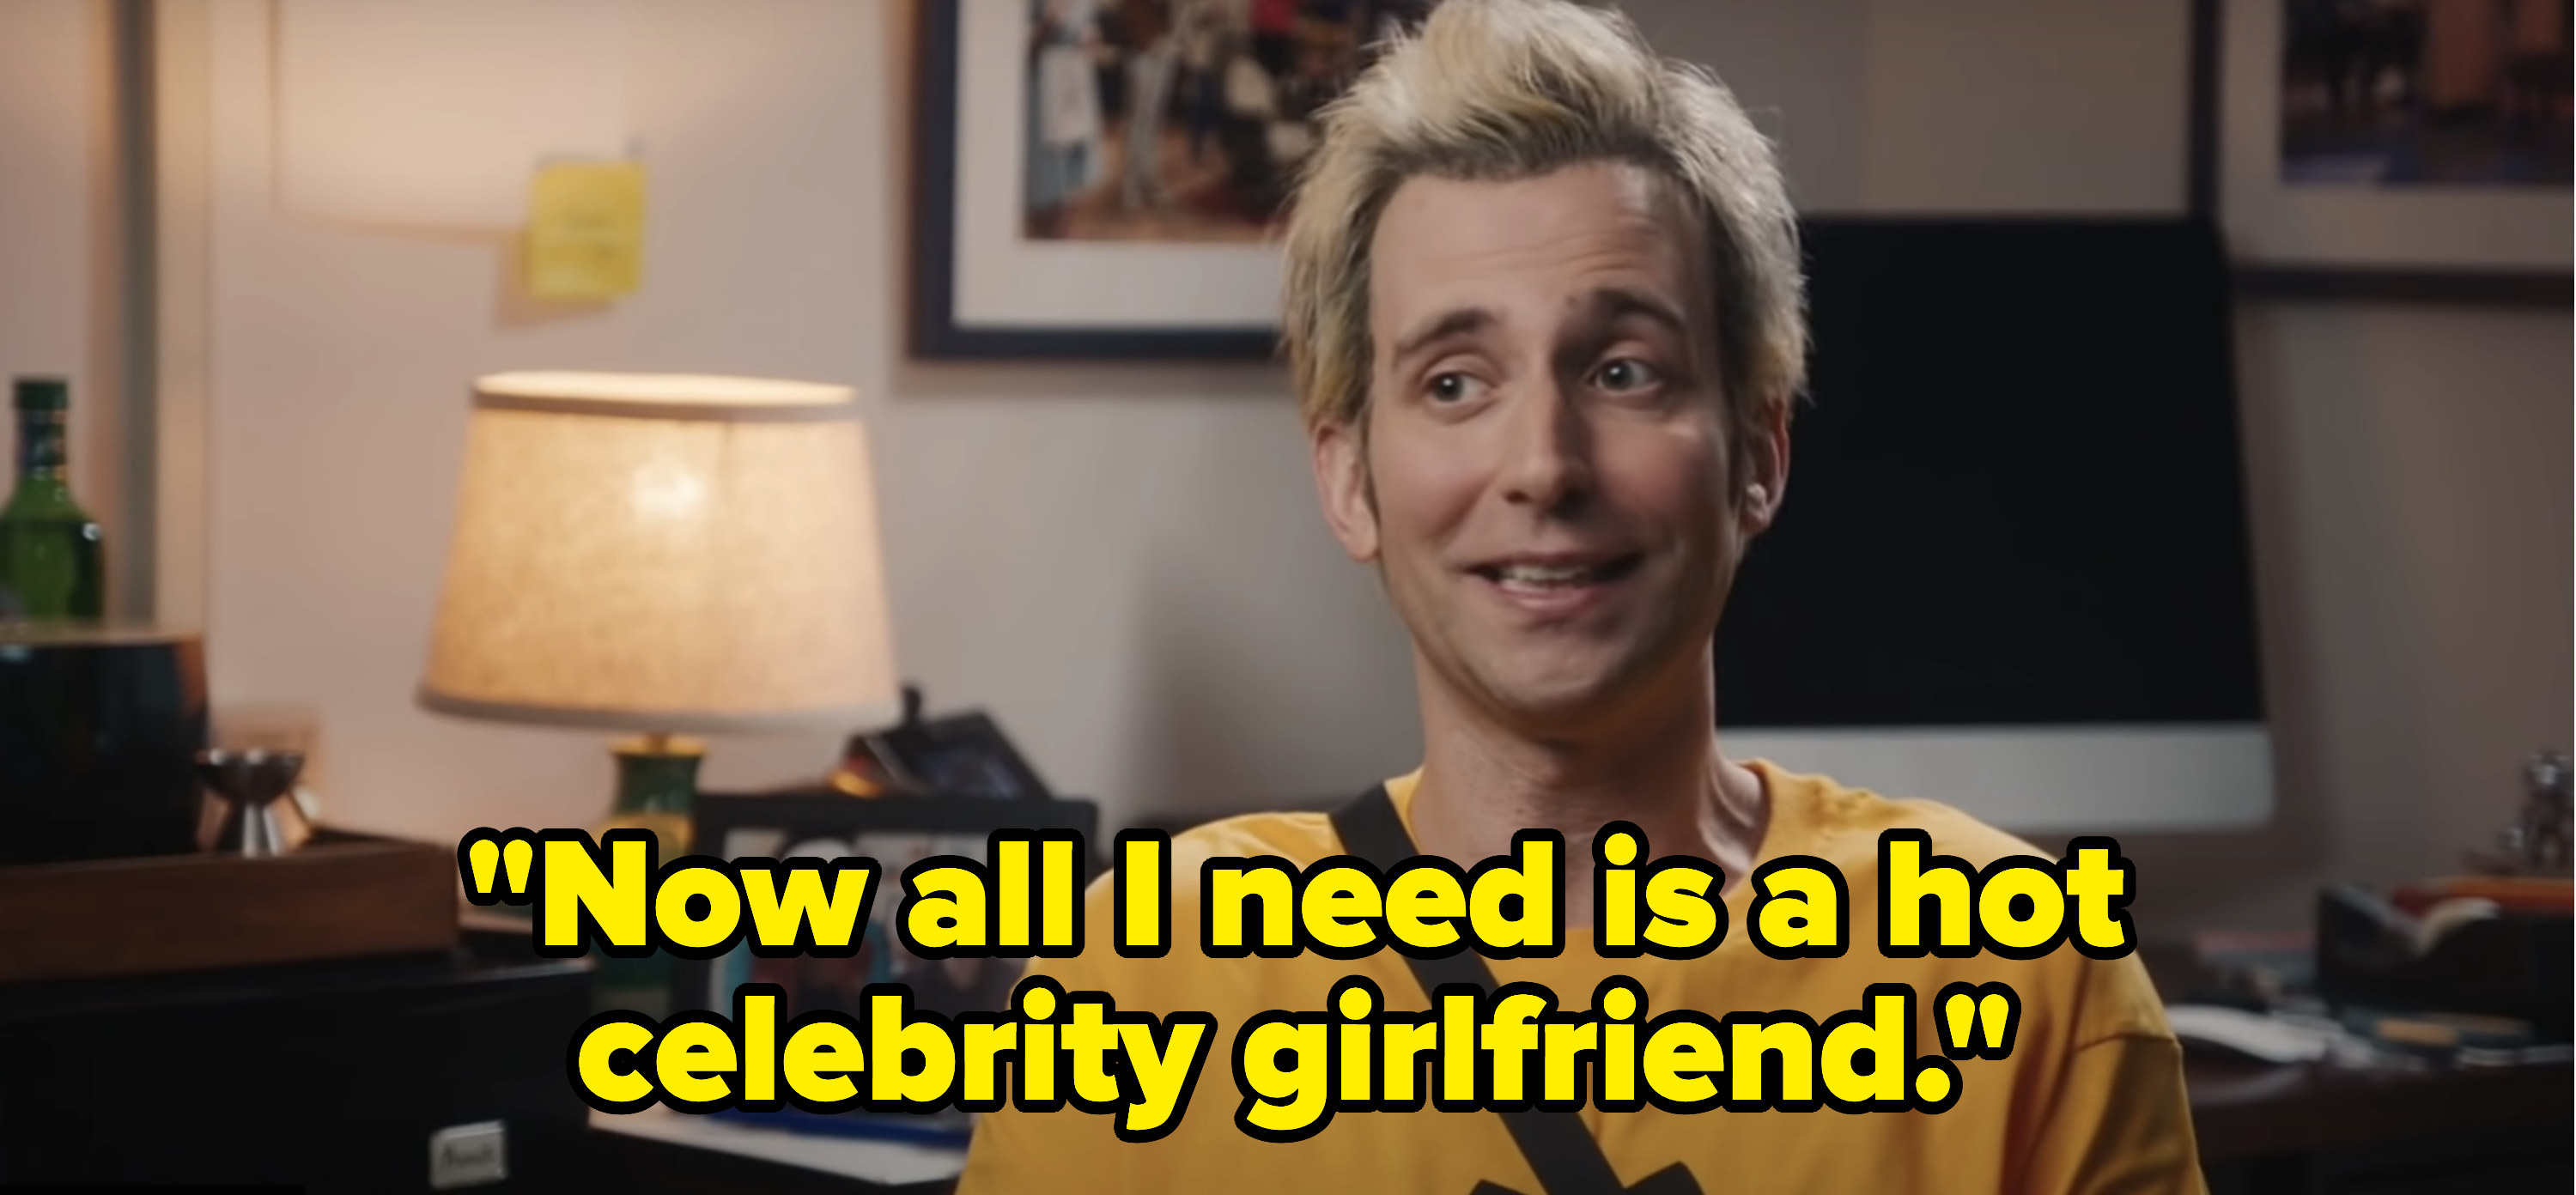 Person as Pete saying now all I need is a hot celebrity girlfriend